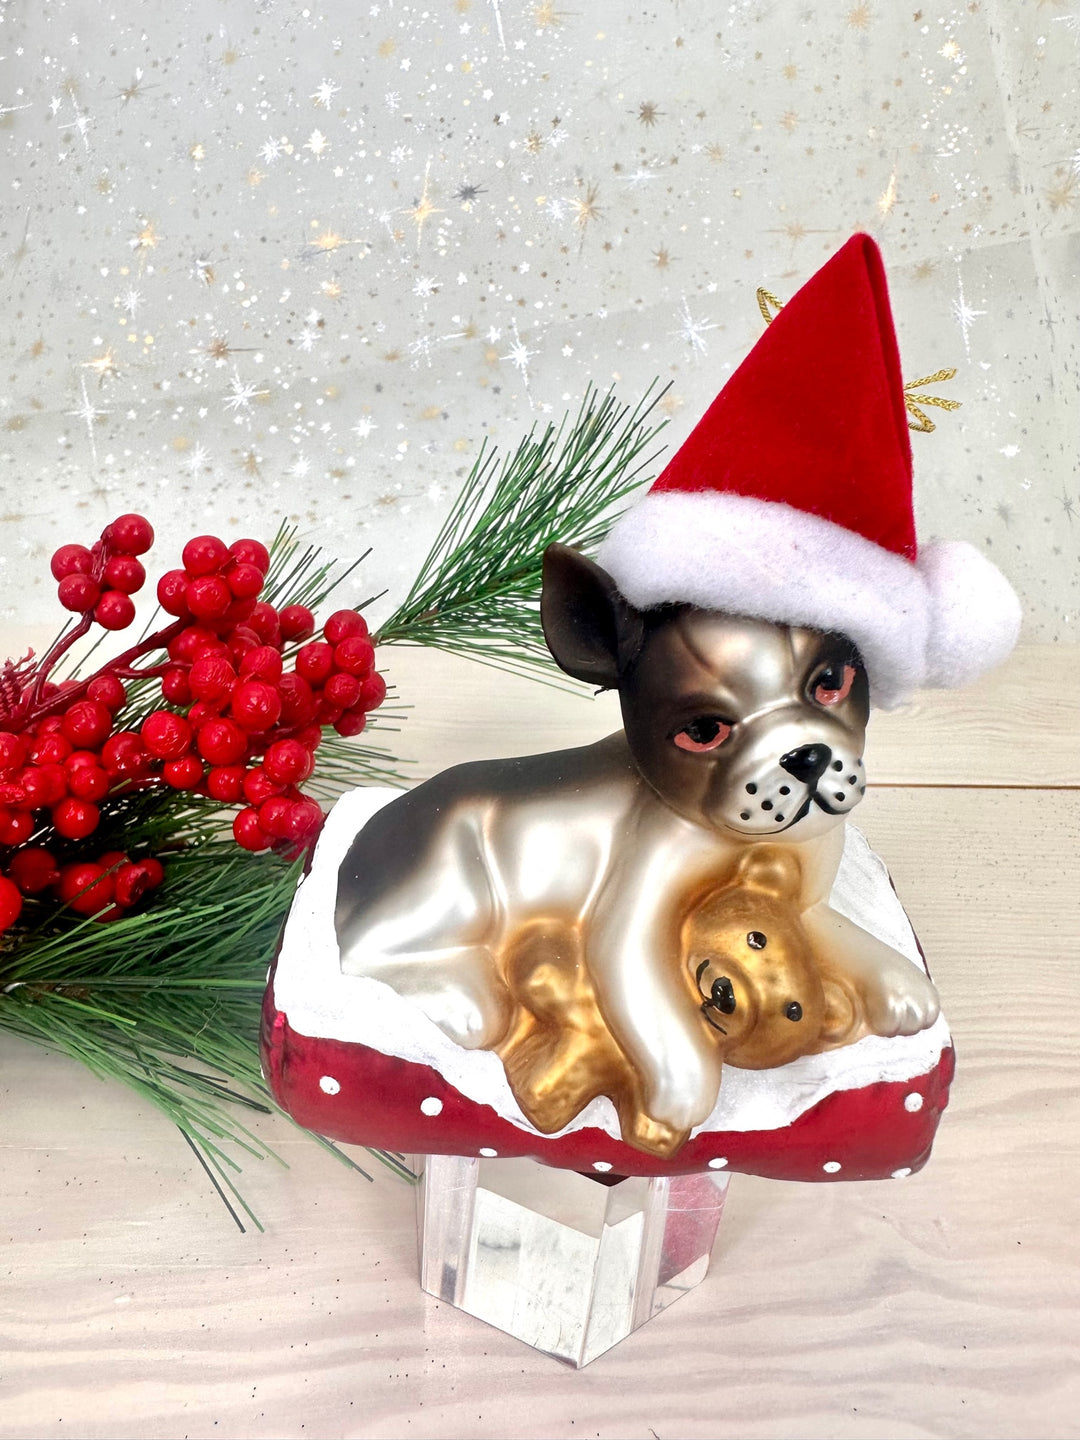 4" (100mm) Dog with Santa Hat and Teddy Bear Glass Figurine Ornaments, 1/Box, 6/Case, 6 Pieces